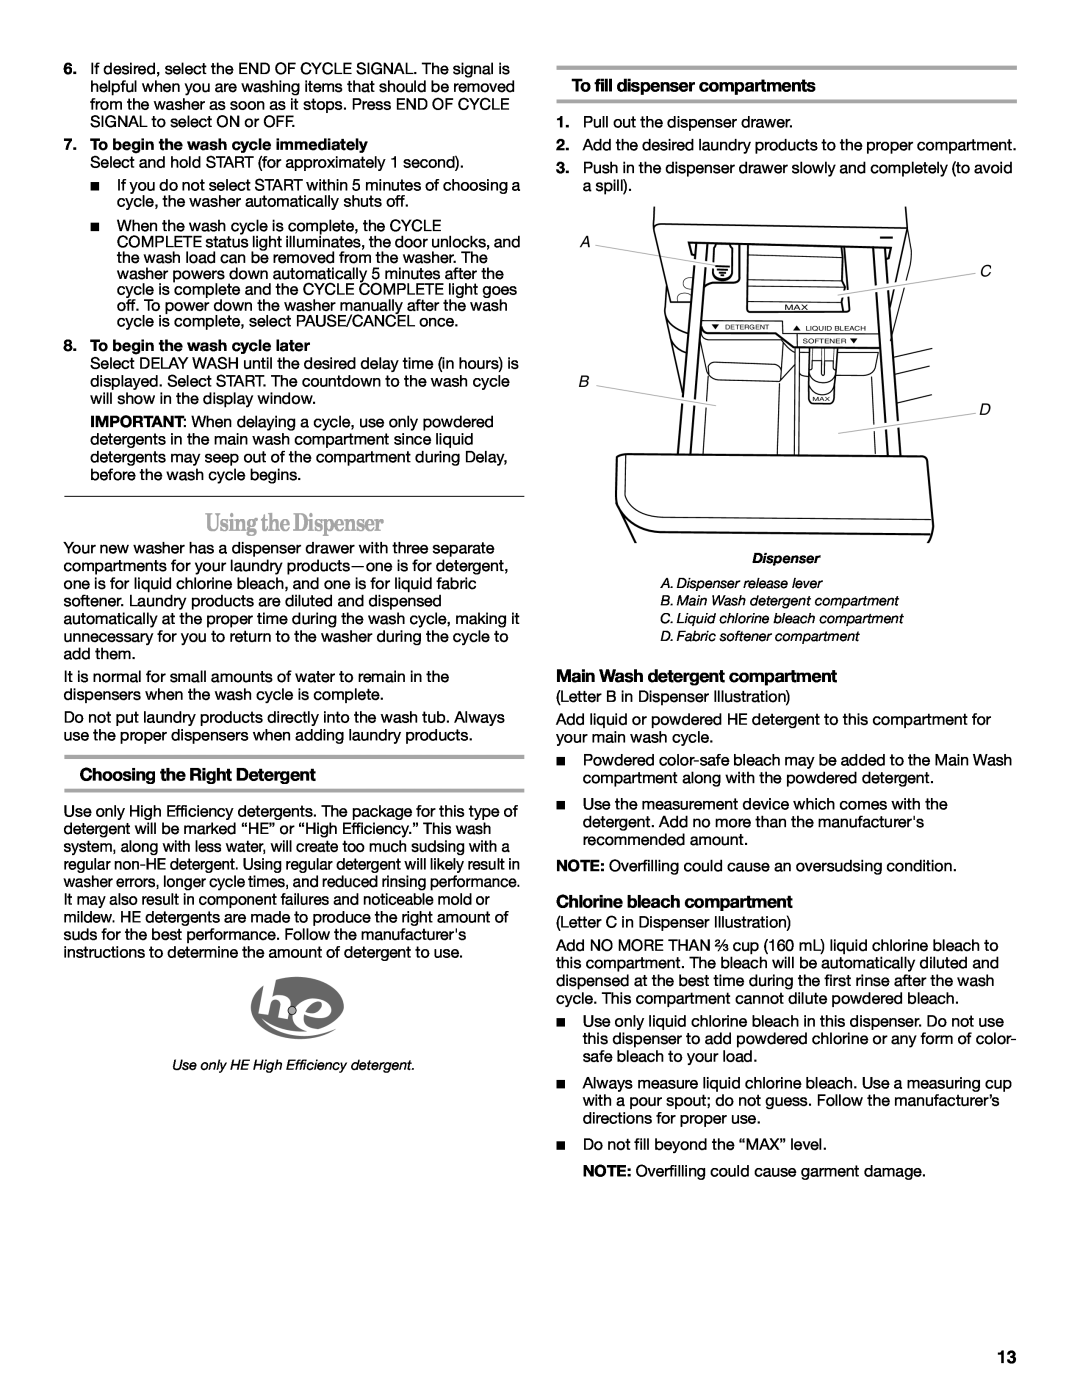 Whirlpool W10117768A manual UsingtheDispenser, Choosing the Right Detergent, To fill dispenser compartments 